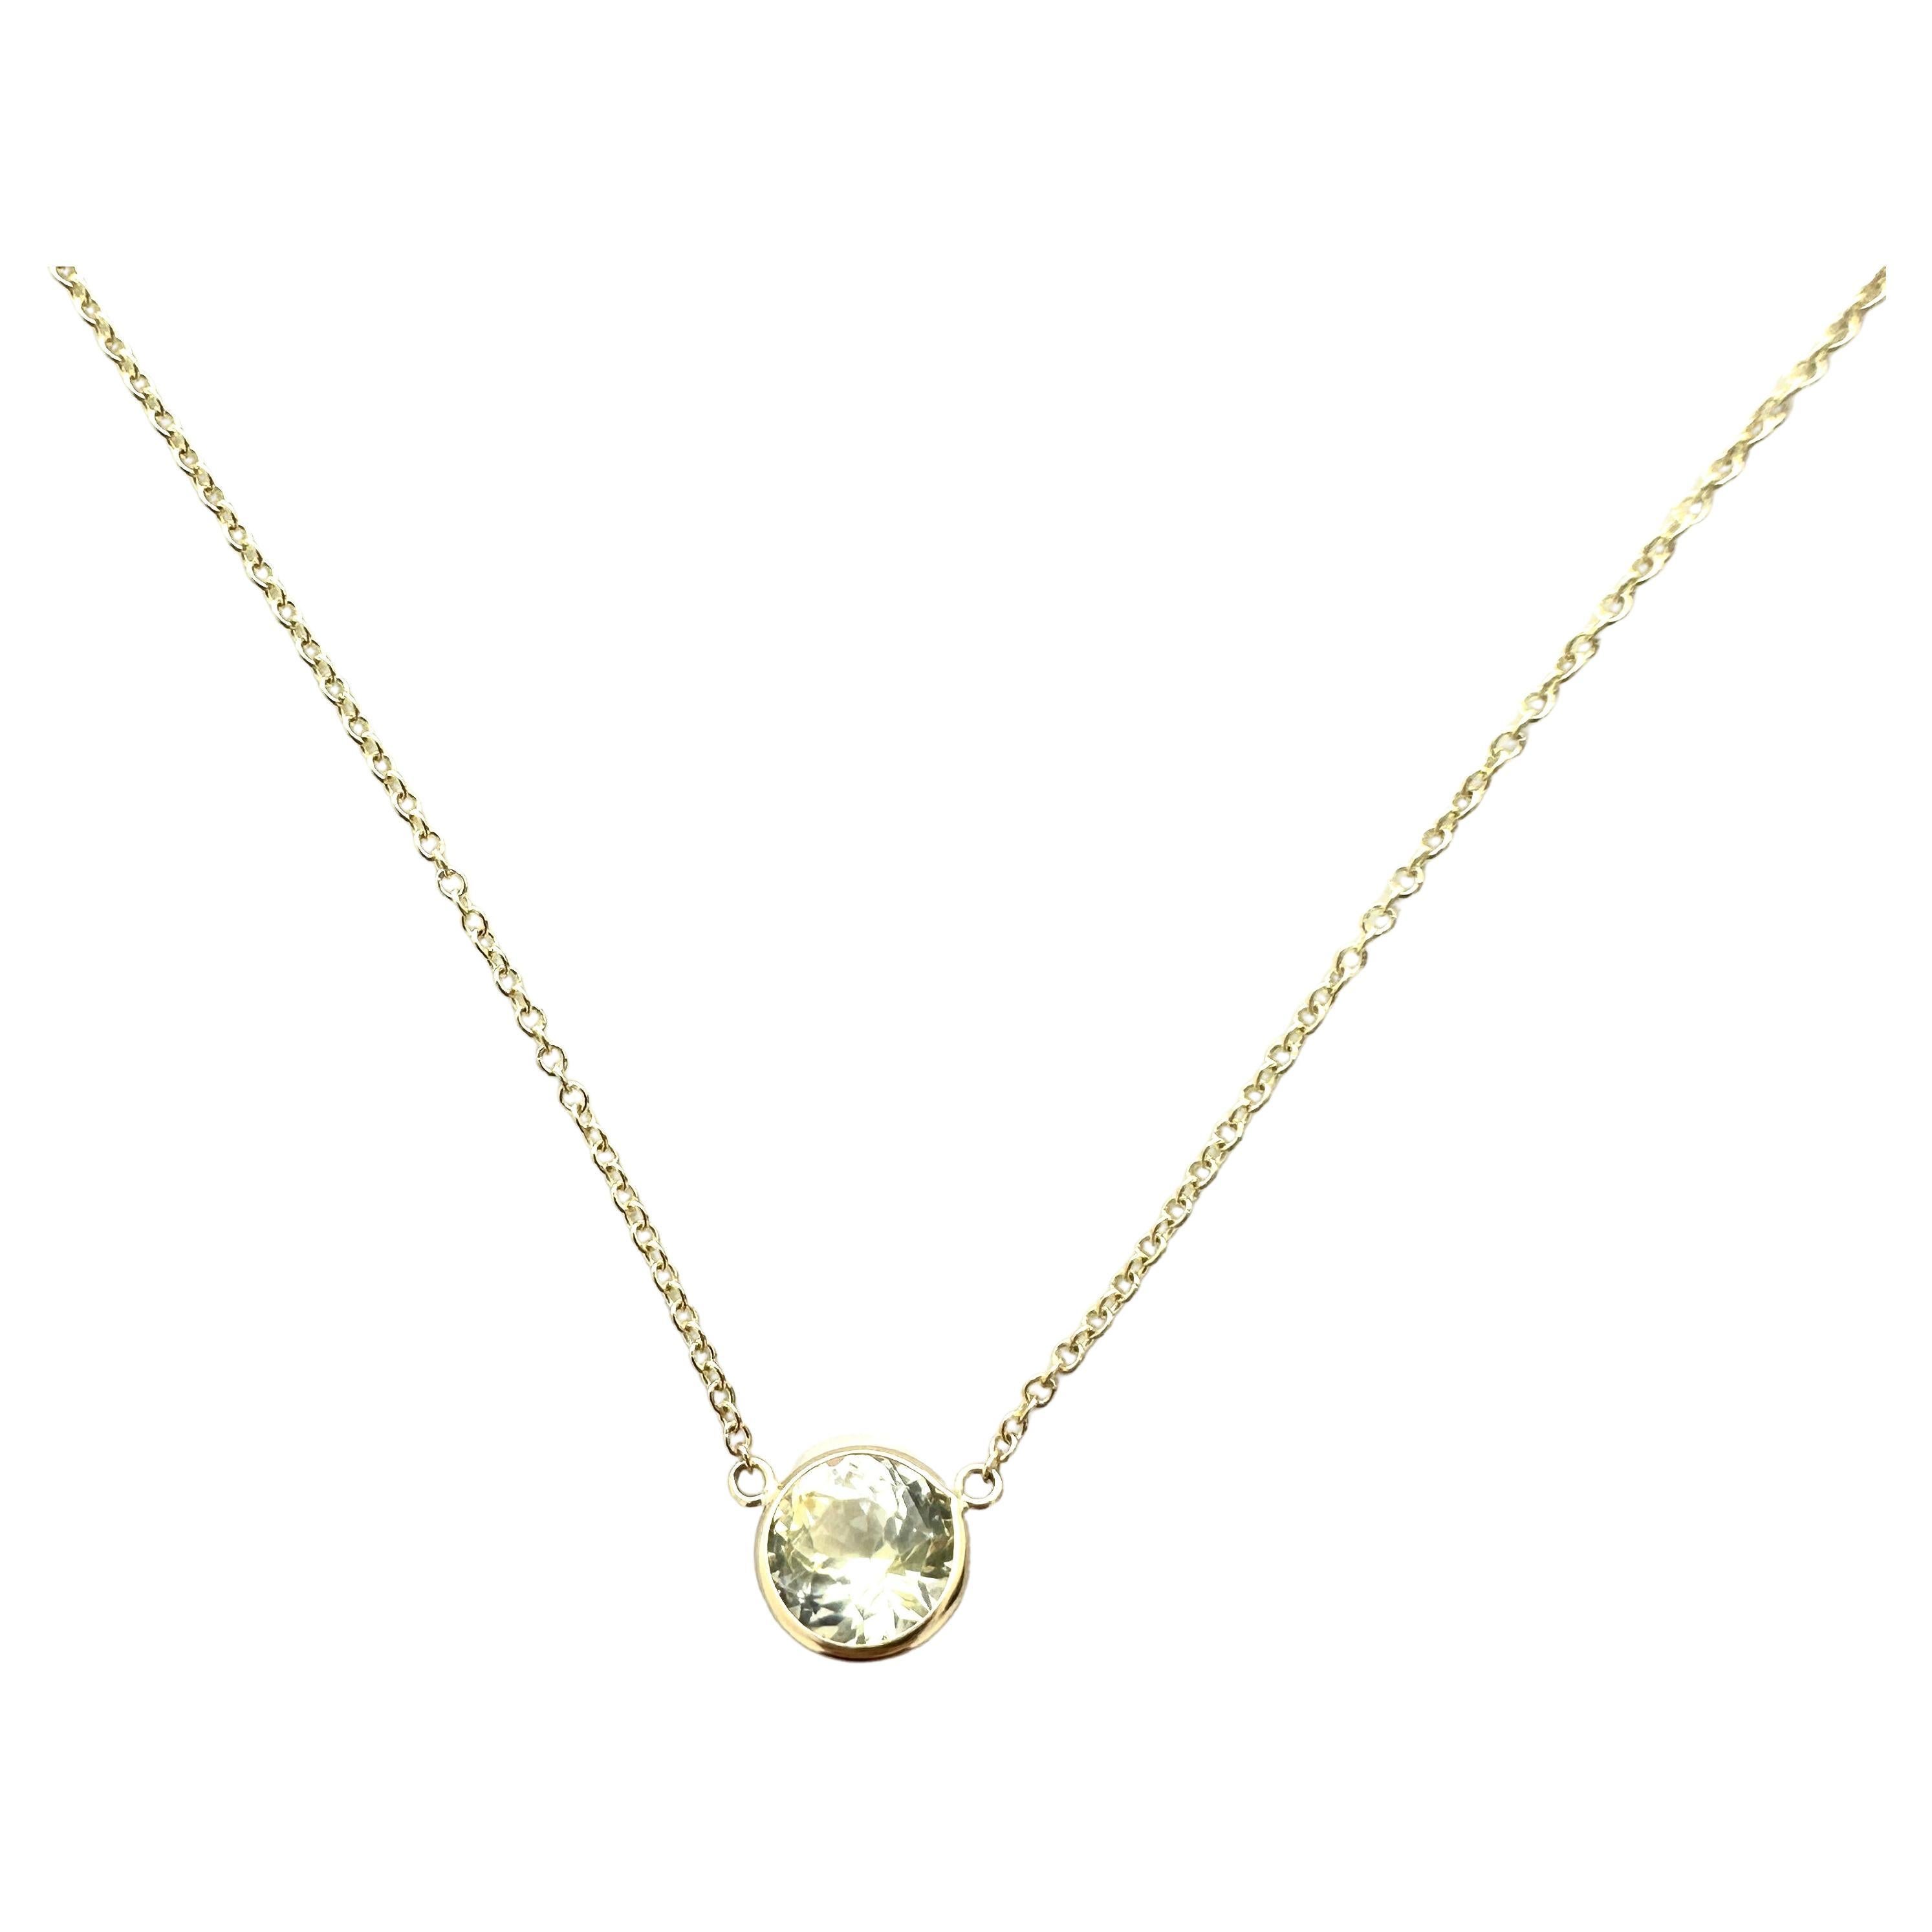 2.35 Carat Weight Yellow Sapphire Round Cut Solitaire Necklace in 14k YG